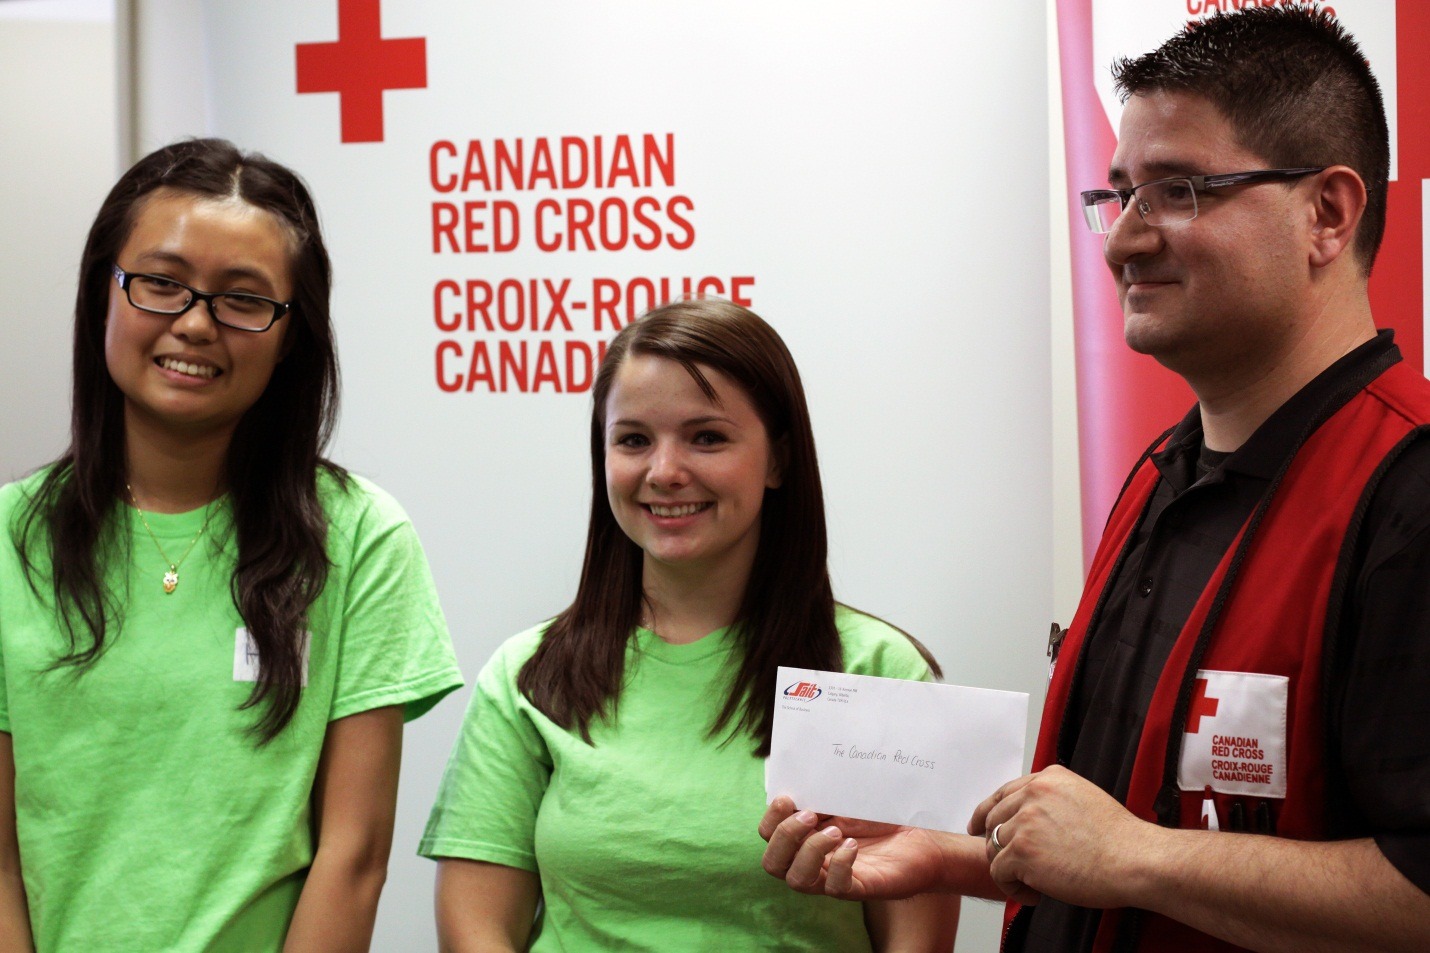 Helen Tu and Carrie Rhode present a cheque to Canadian Red Cross Fund Development Officer Andres Gutierrez